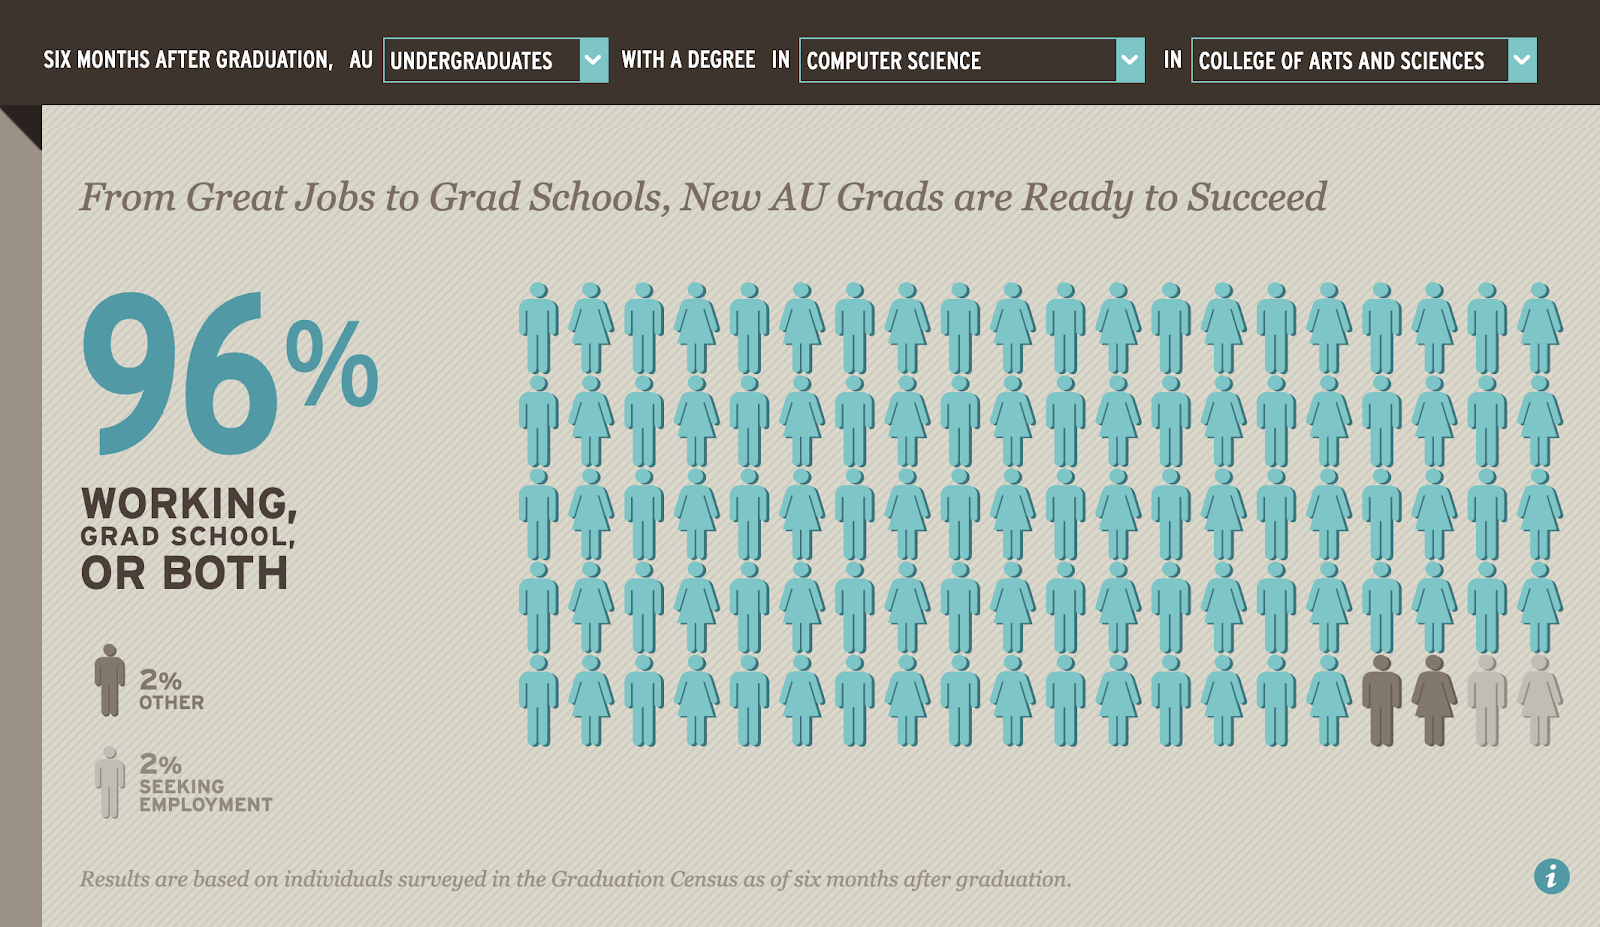 The American University "We Know Success" page